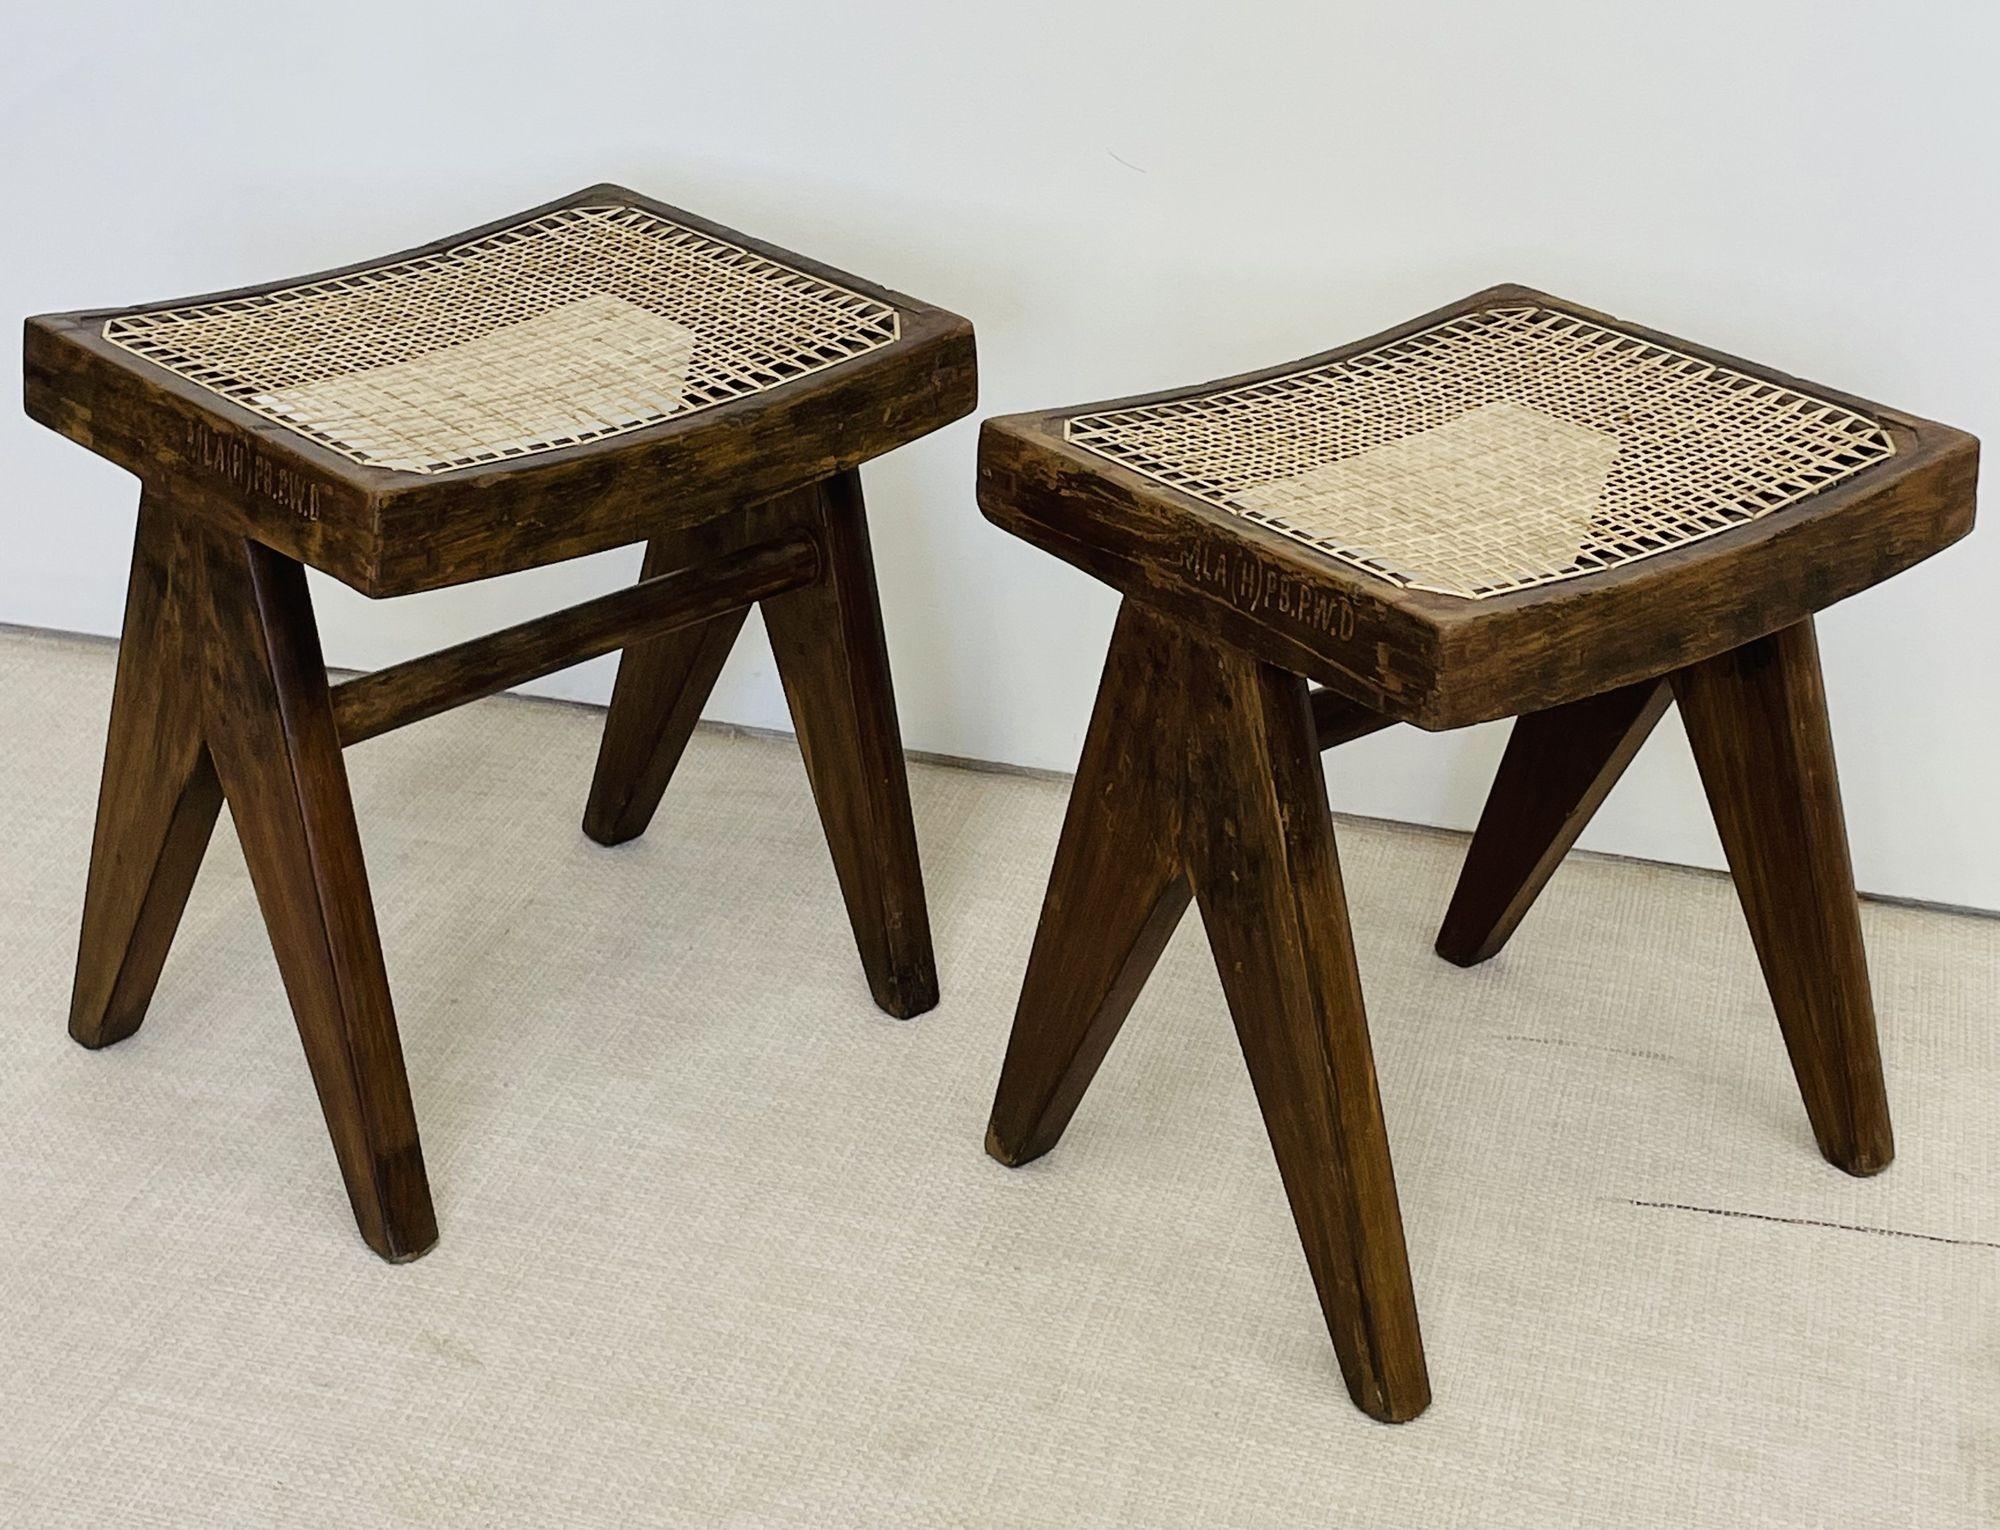 Pierre Jeanneret 'Low Stools,' Model PJ-SI-34-A 
 
Both stools or ottomans have a rectangular seat with a curved frame and a compass type double side leg assembly. 
 
France, India, c. 1960s
 
Each with markings indicating provenance - These are